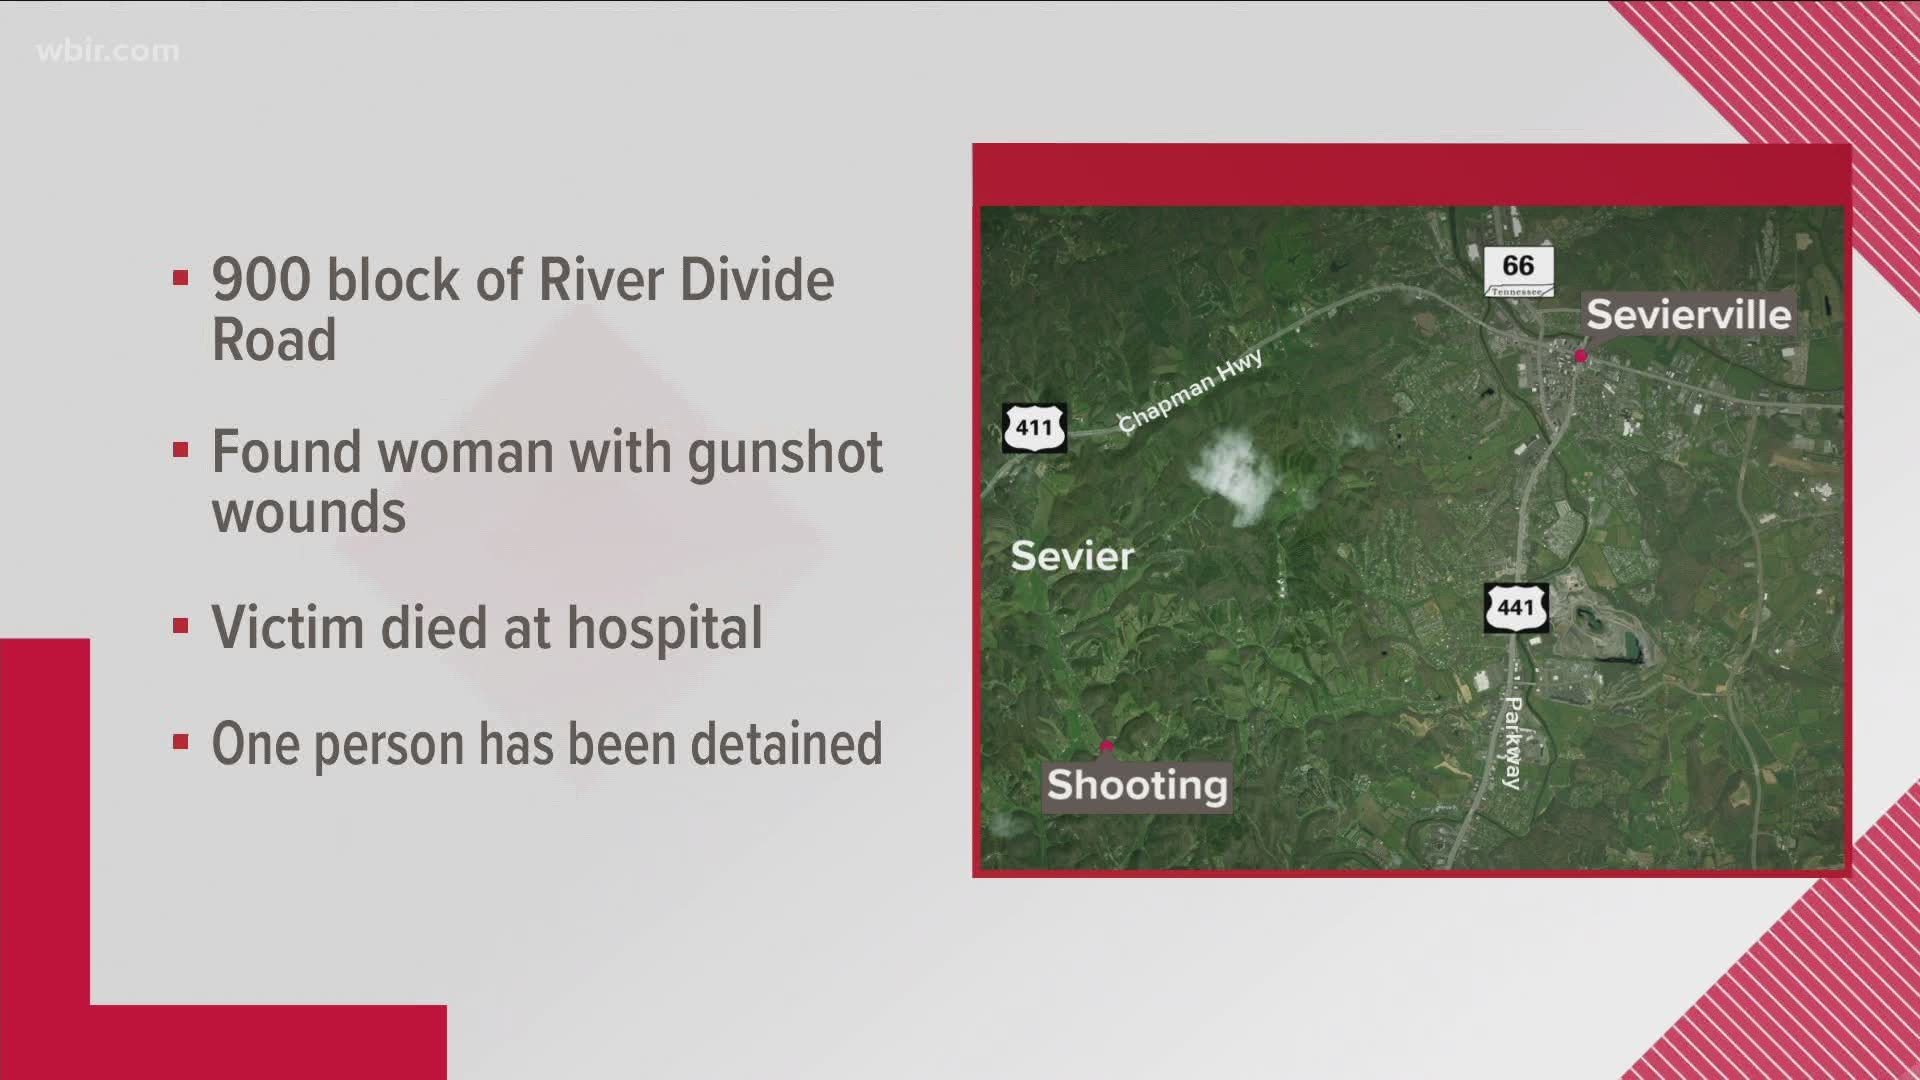 The Sevier County Sheriff's Office is investigating a 73-year-old woman's death in a shooting. The sheriff's office said it happened at a home on River Divide Road.